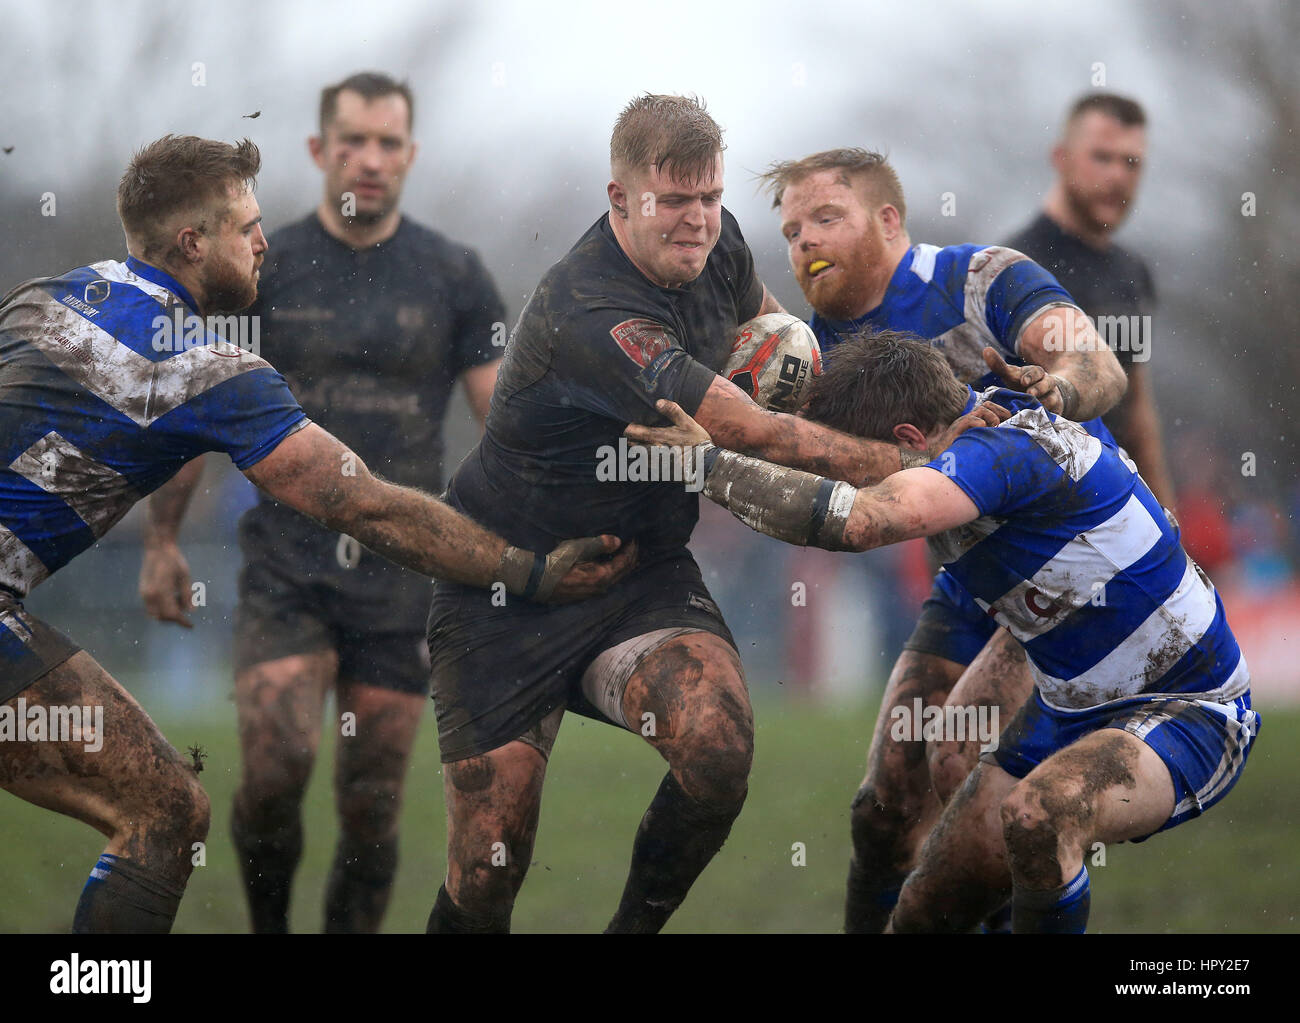 Siddal's Joe Martin (Right) tackles Toronto Wolfpack's Jack Bussey during  the Ladbrokes Challenge Cup match at Siddal ARLFC, Halifax Stock Photo -  Alamy